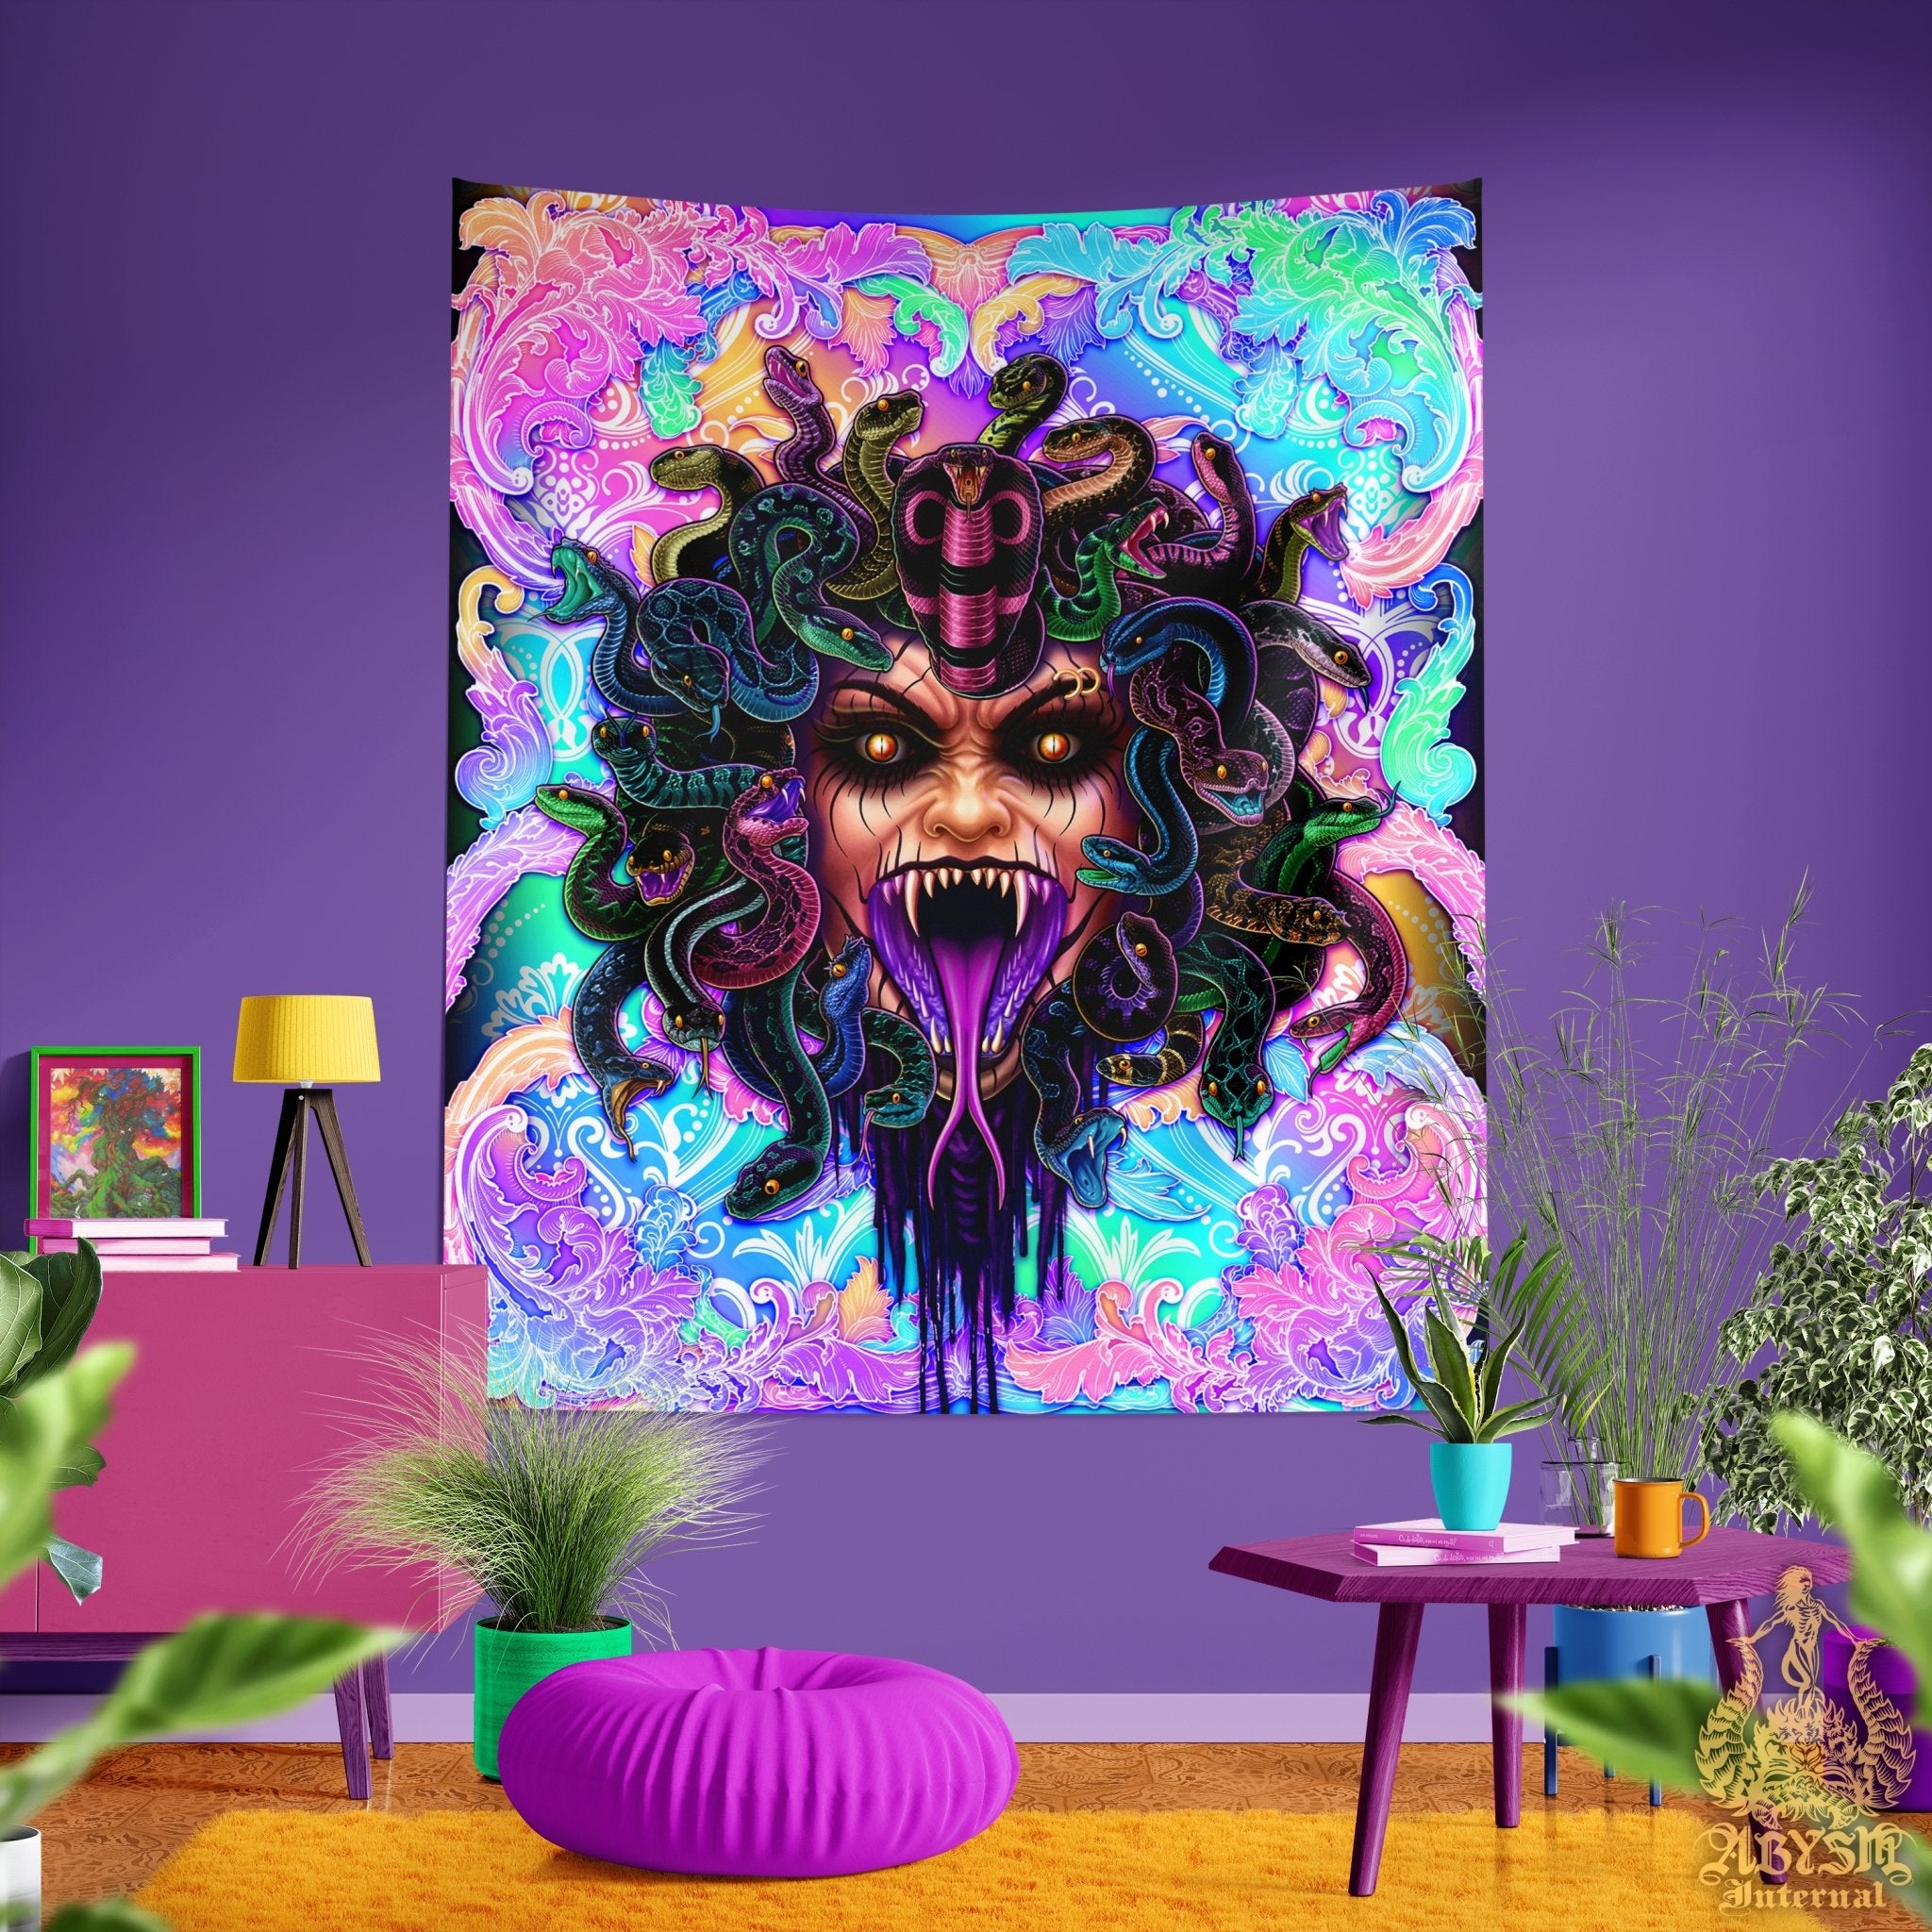 Psychedelic Medusa Tapestry, Holographic Wall Hanging, Aesthetic Home Decor, Art Print, Eclectic and Funky - Pastel Punk Black, 3 Faces - Abysm Internal